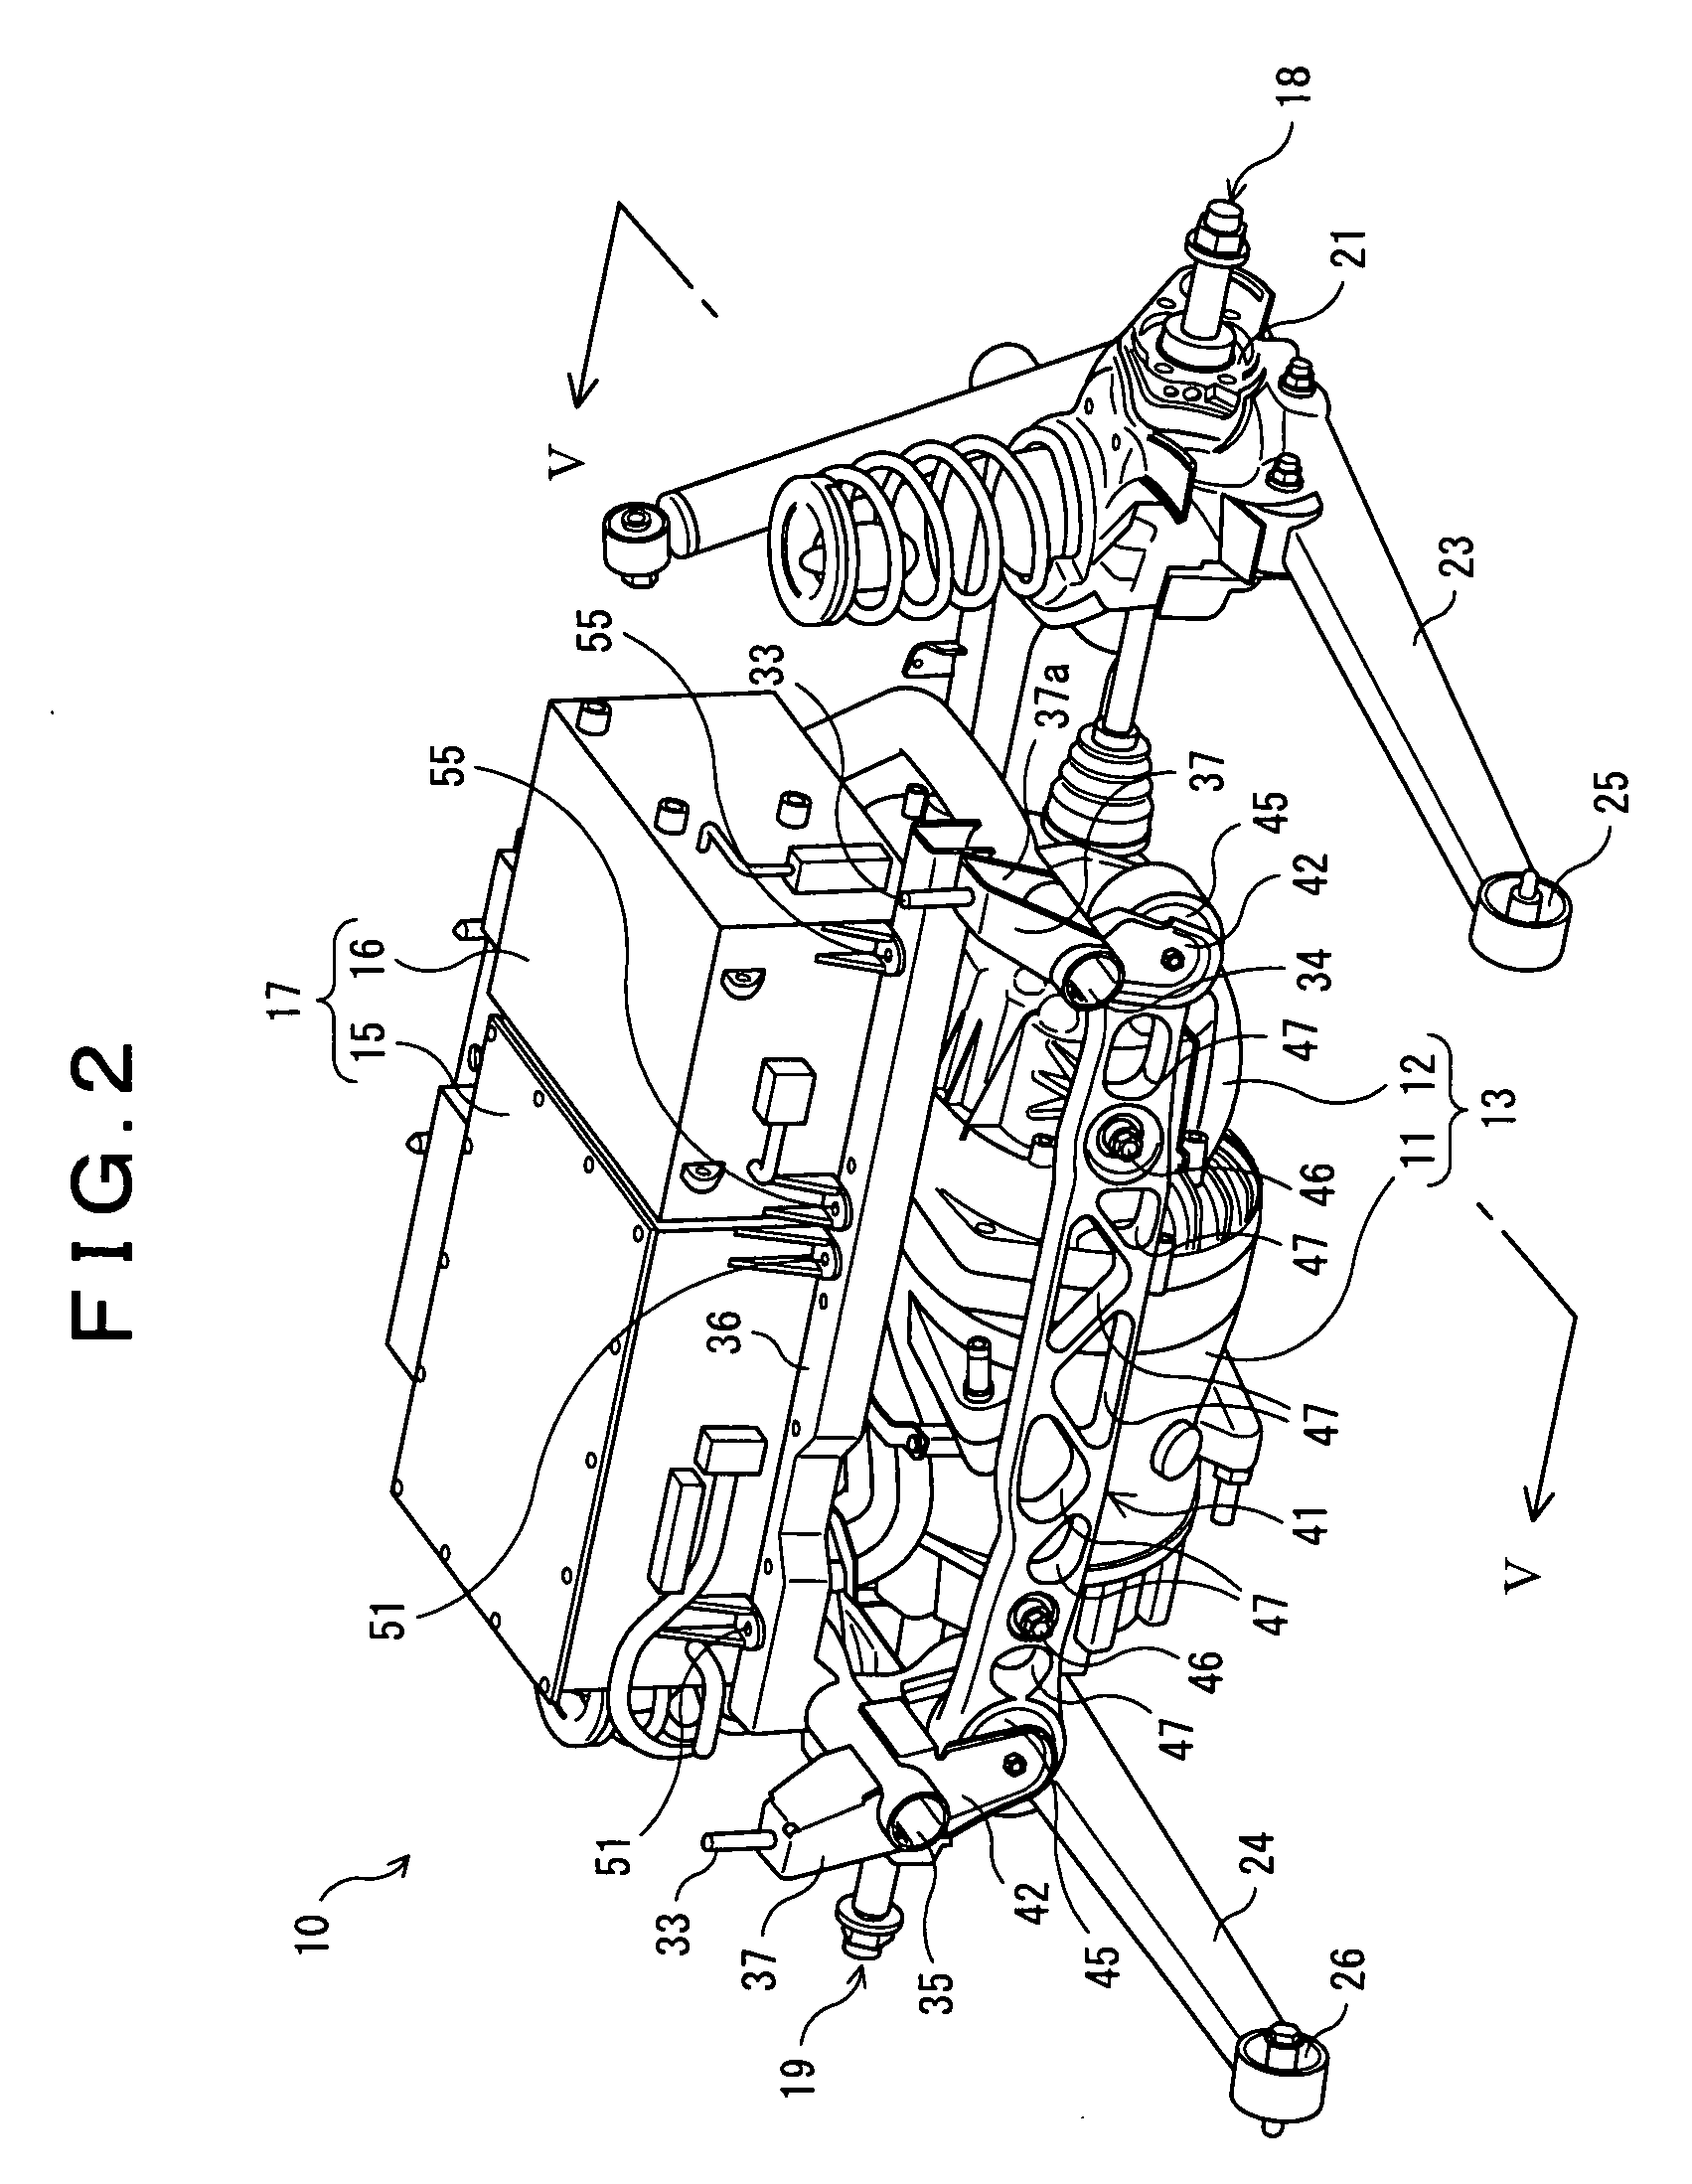 Electric motor mounting structure for vehicles